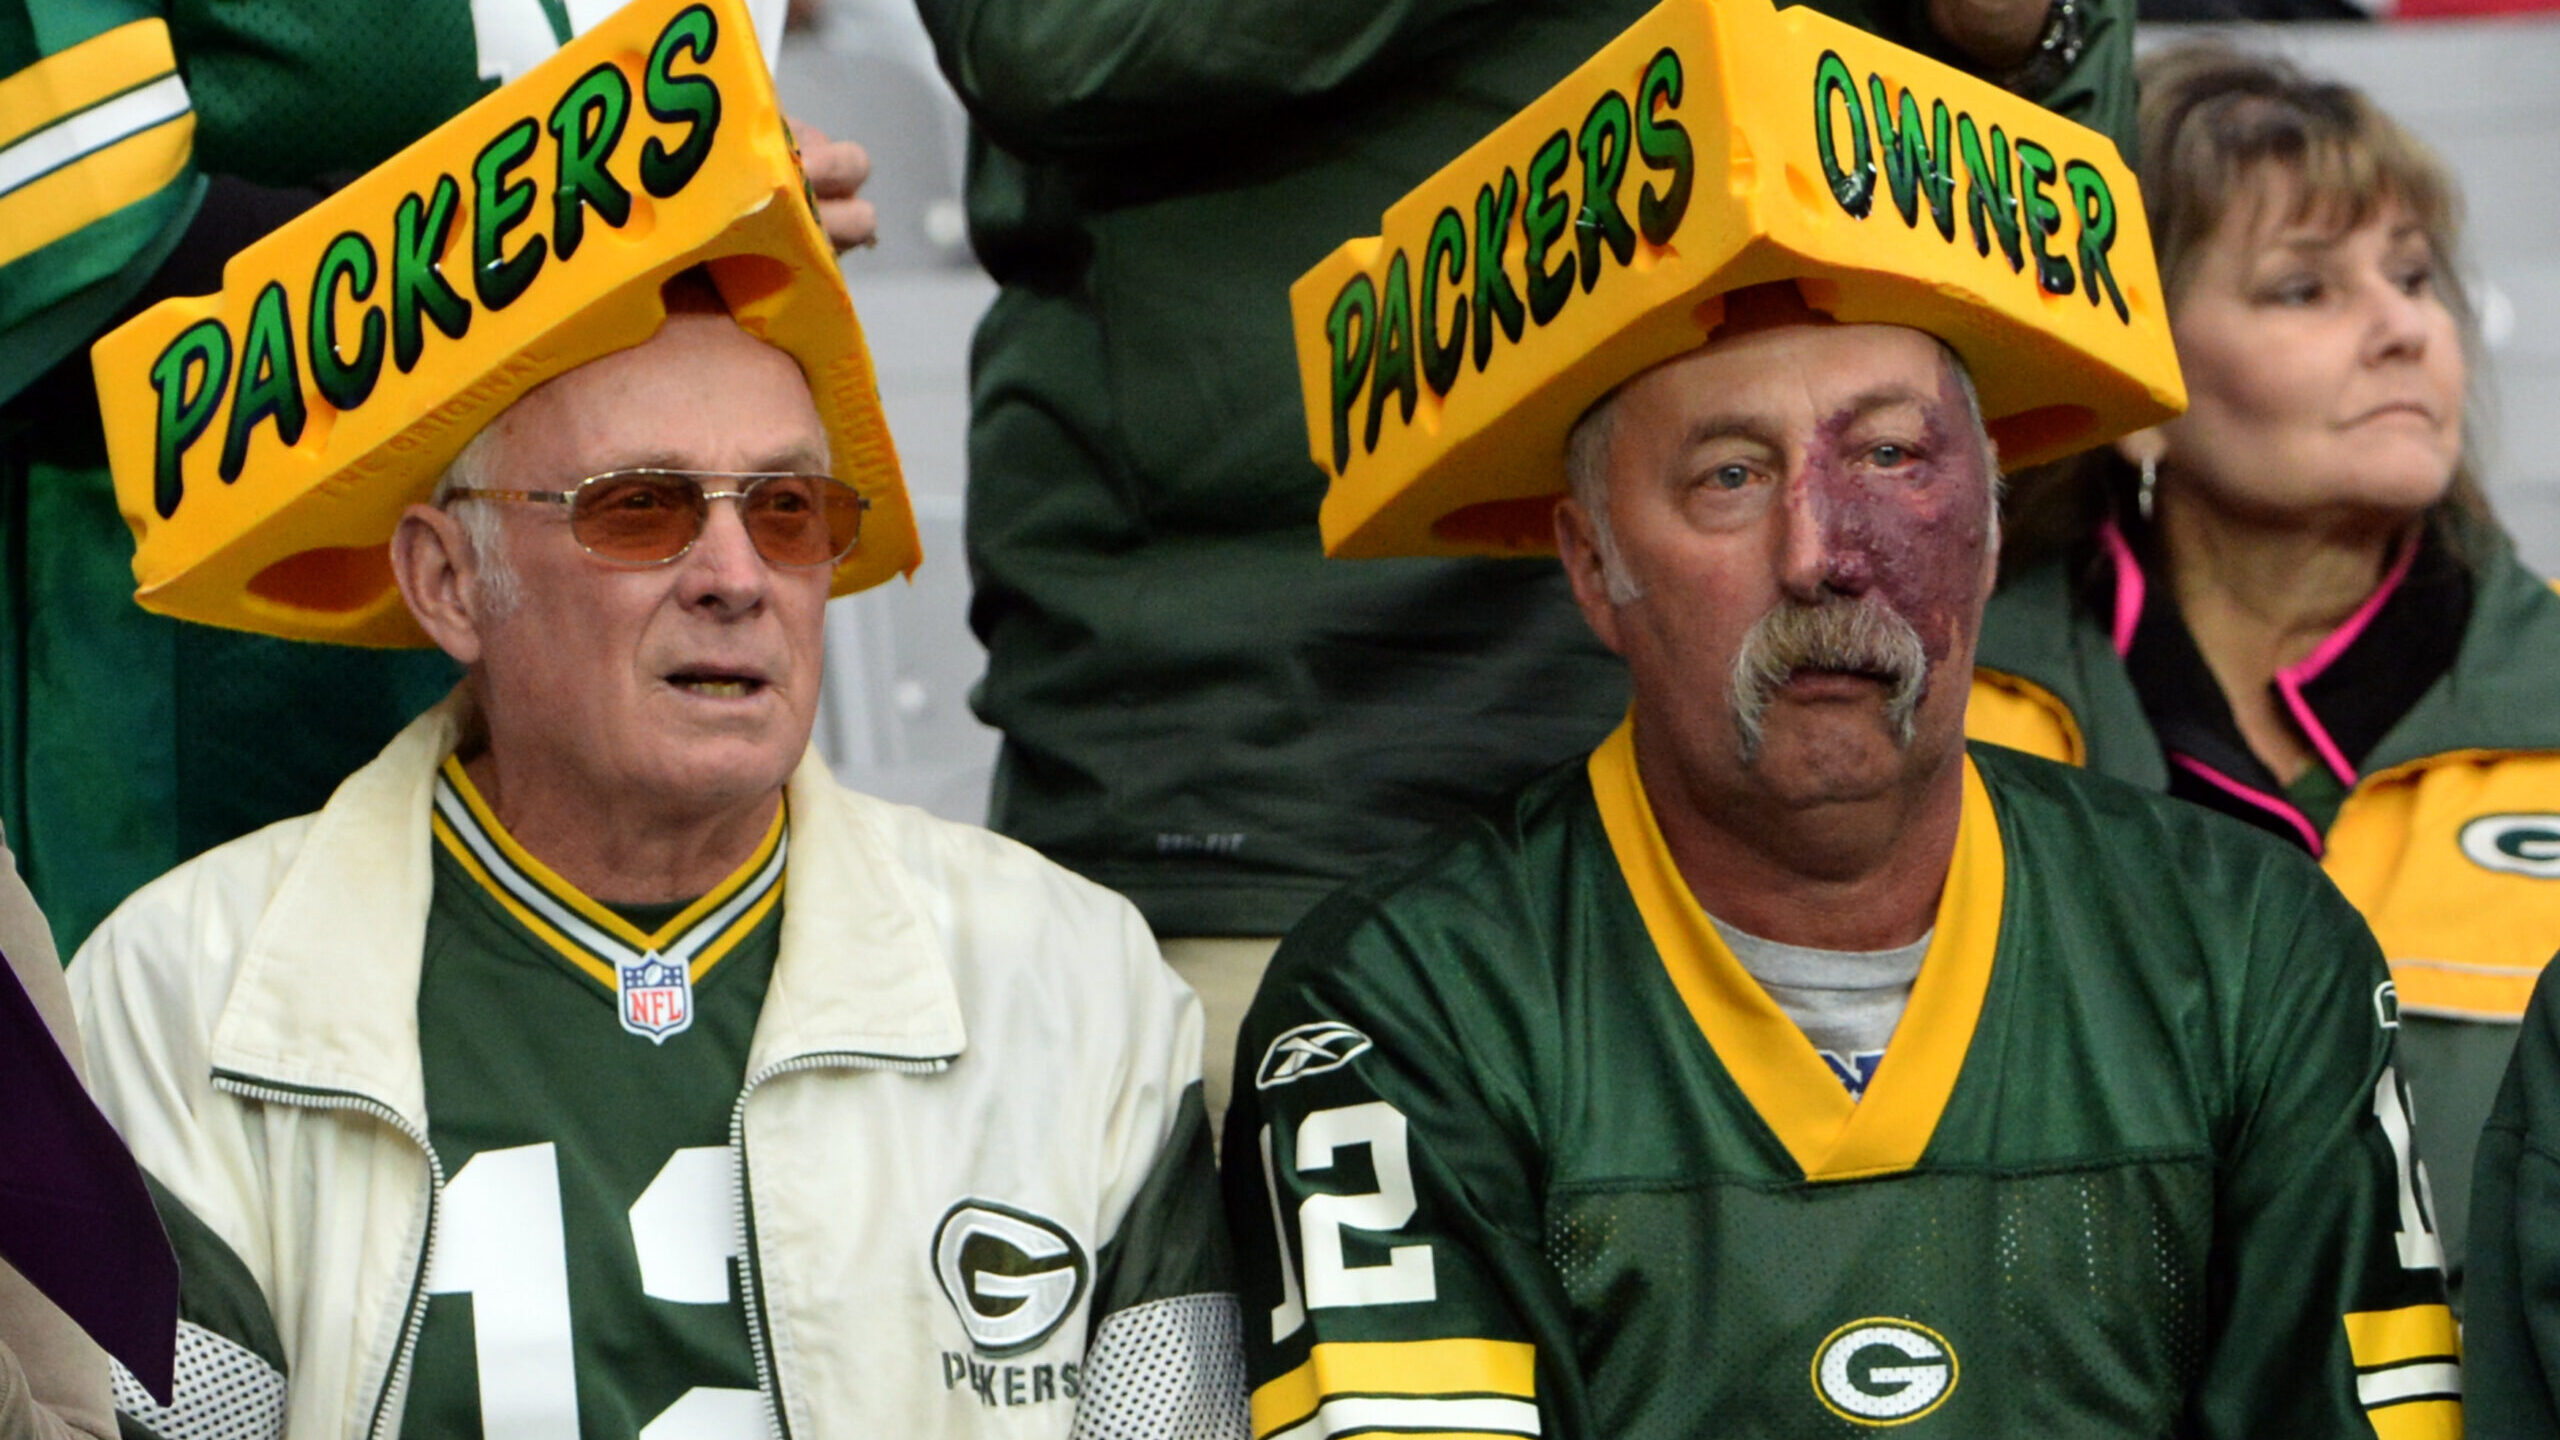 green bay packers owner